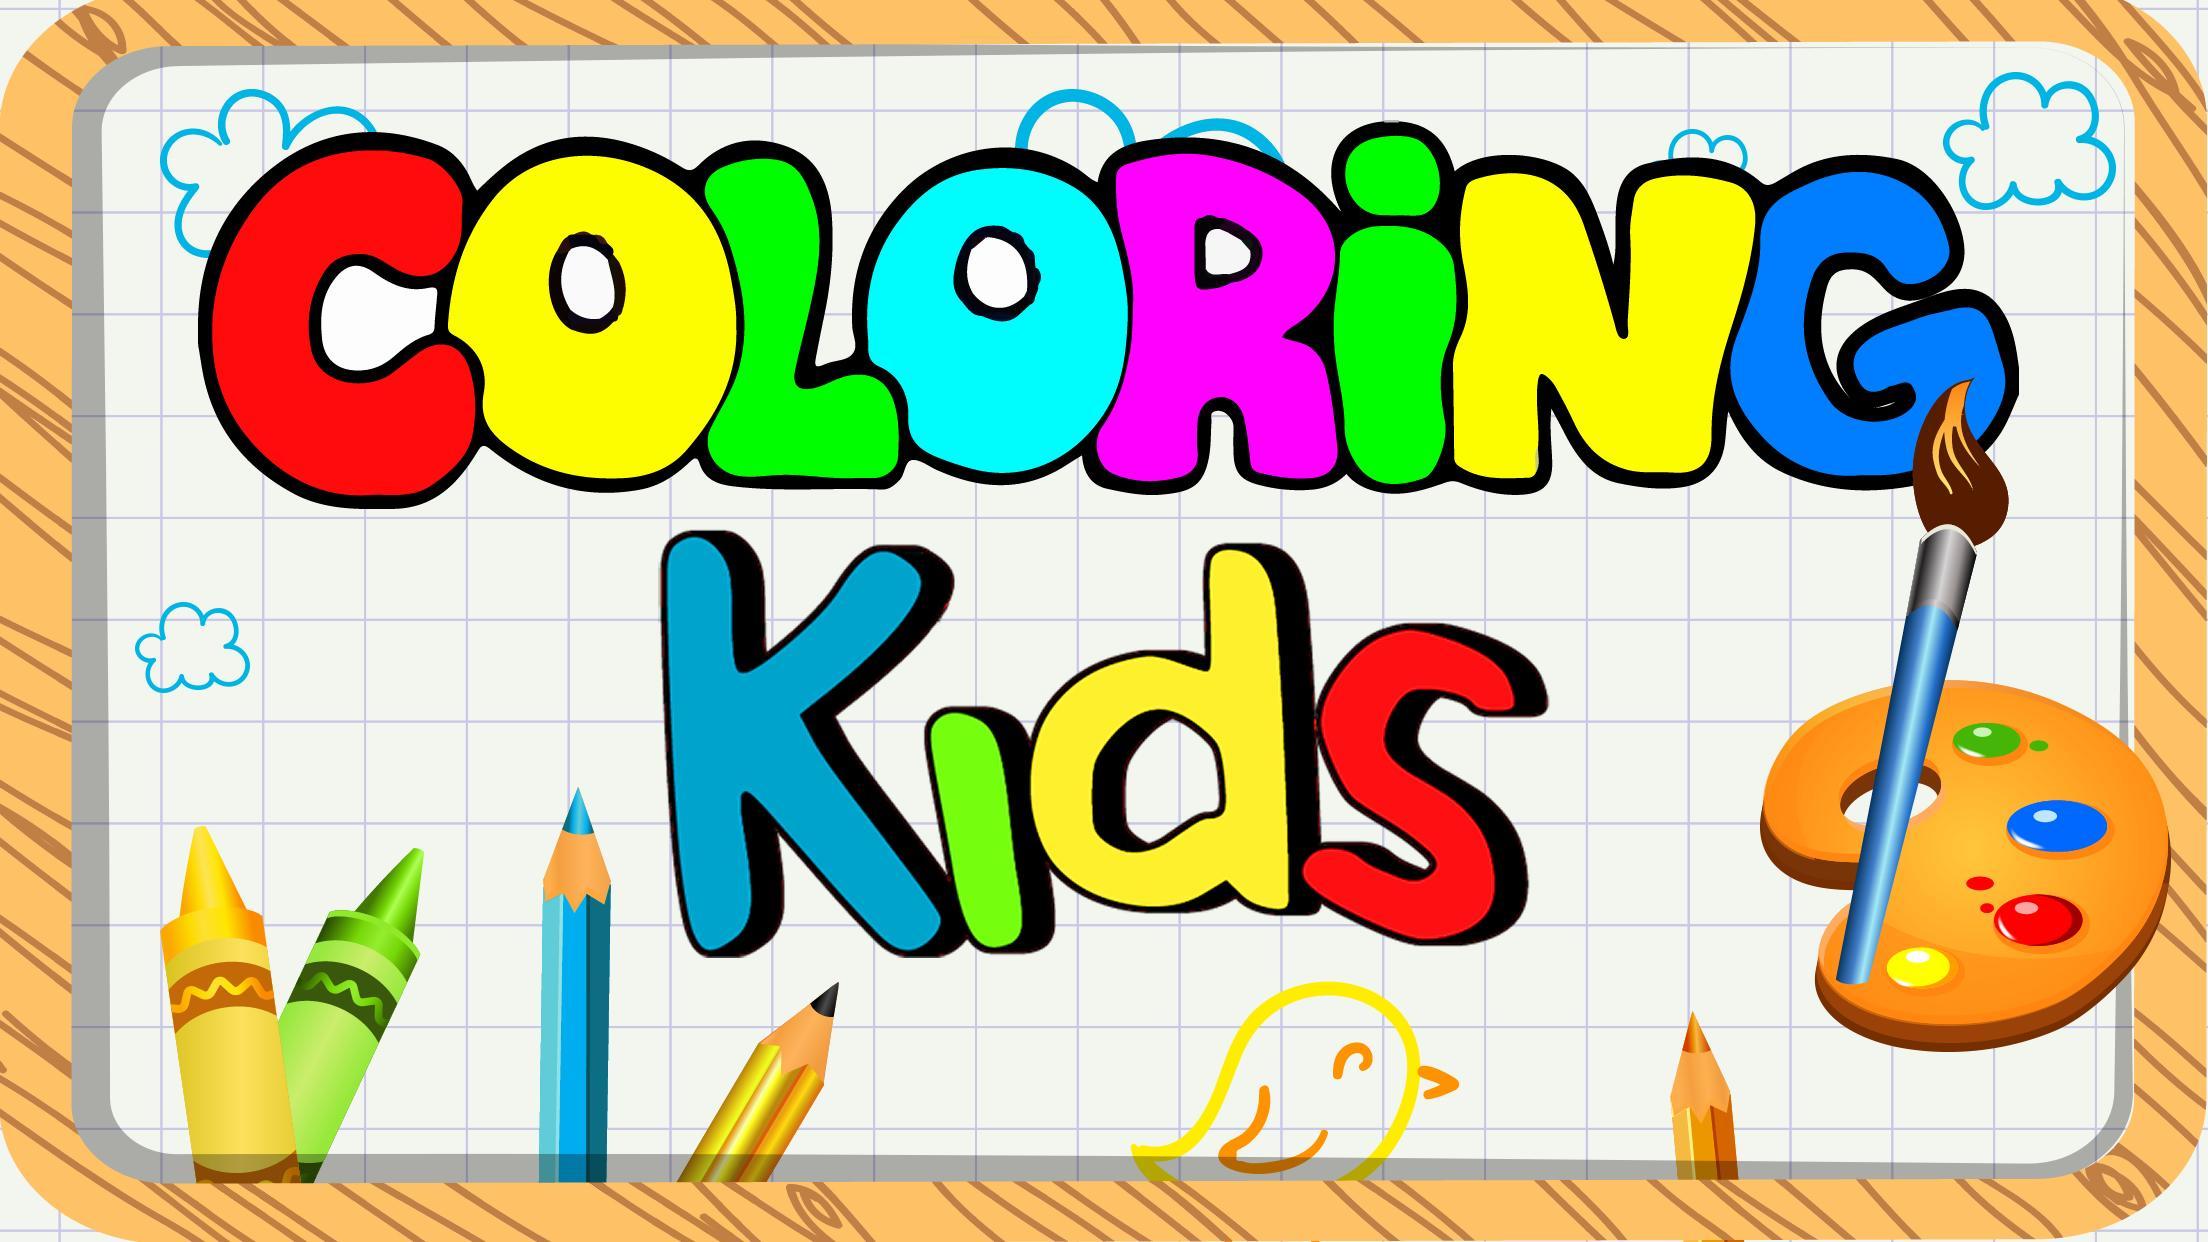 Coloring Pages for Android - APK Download